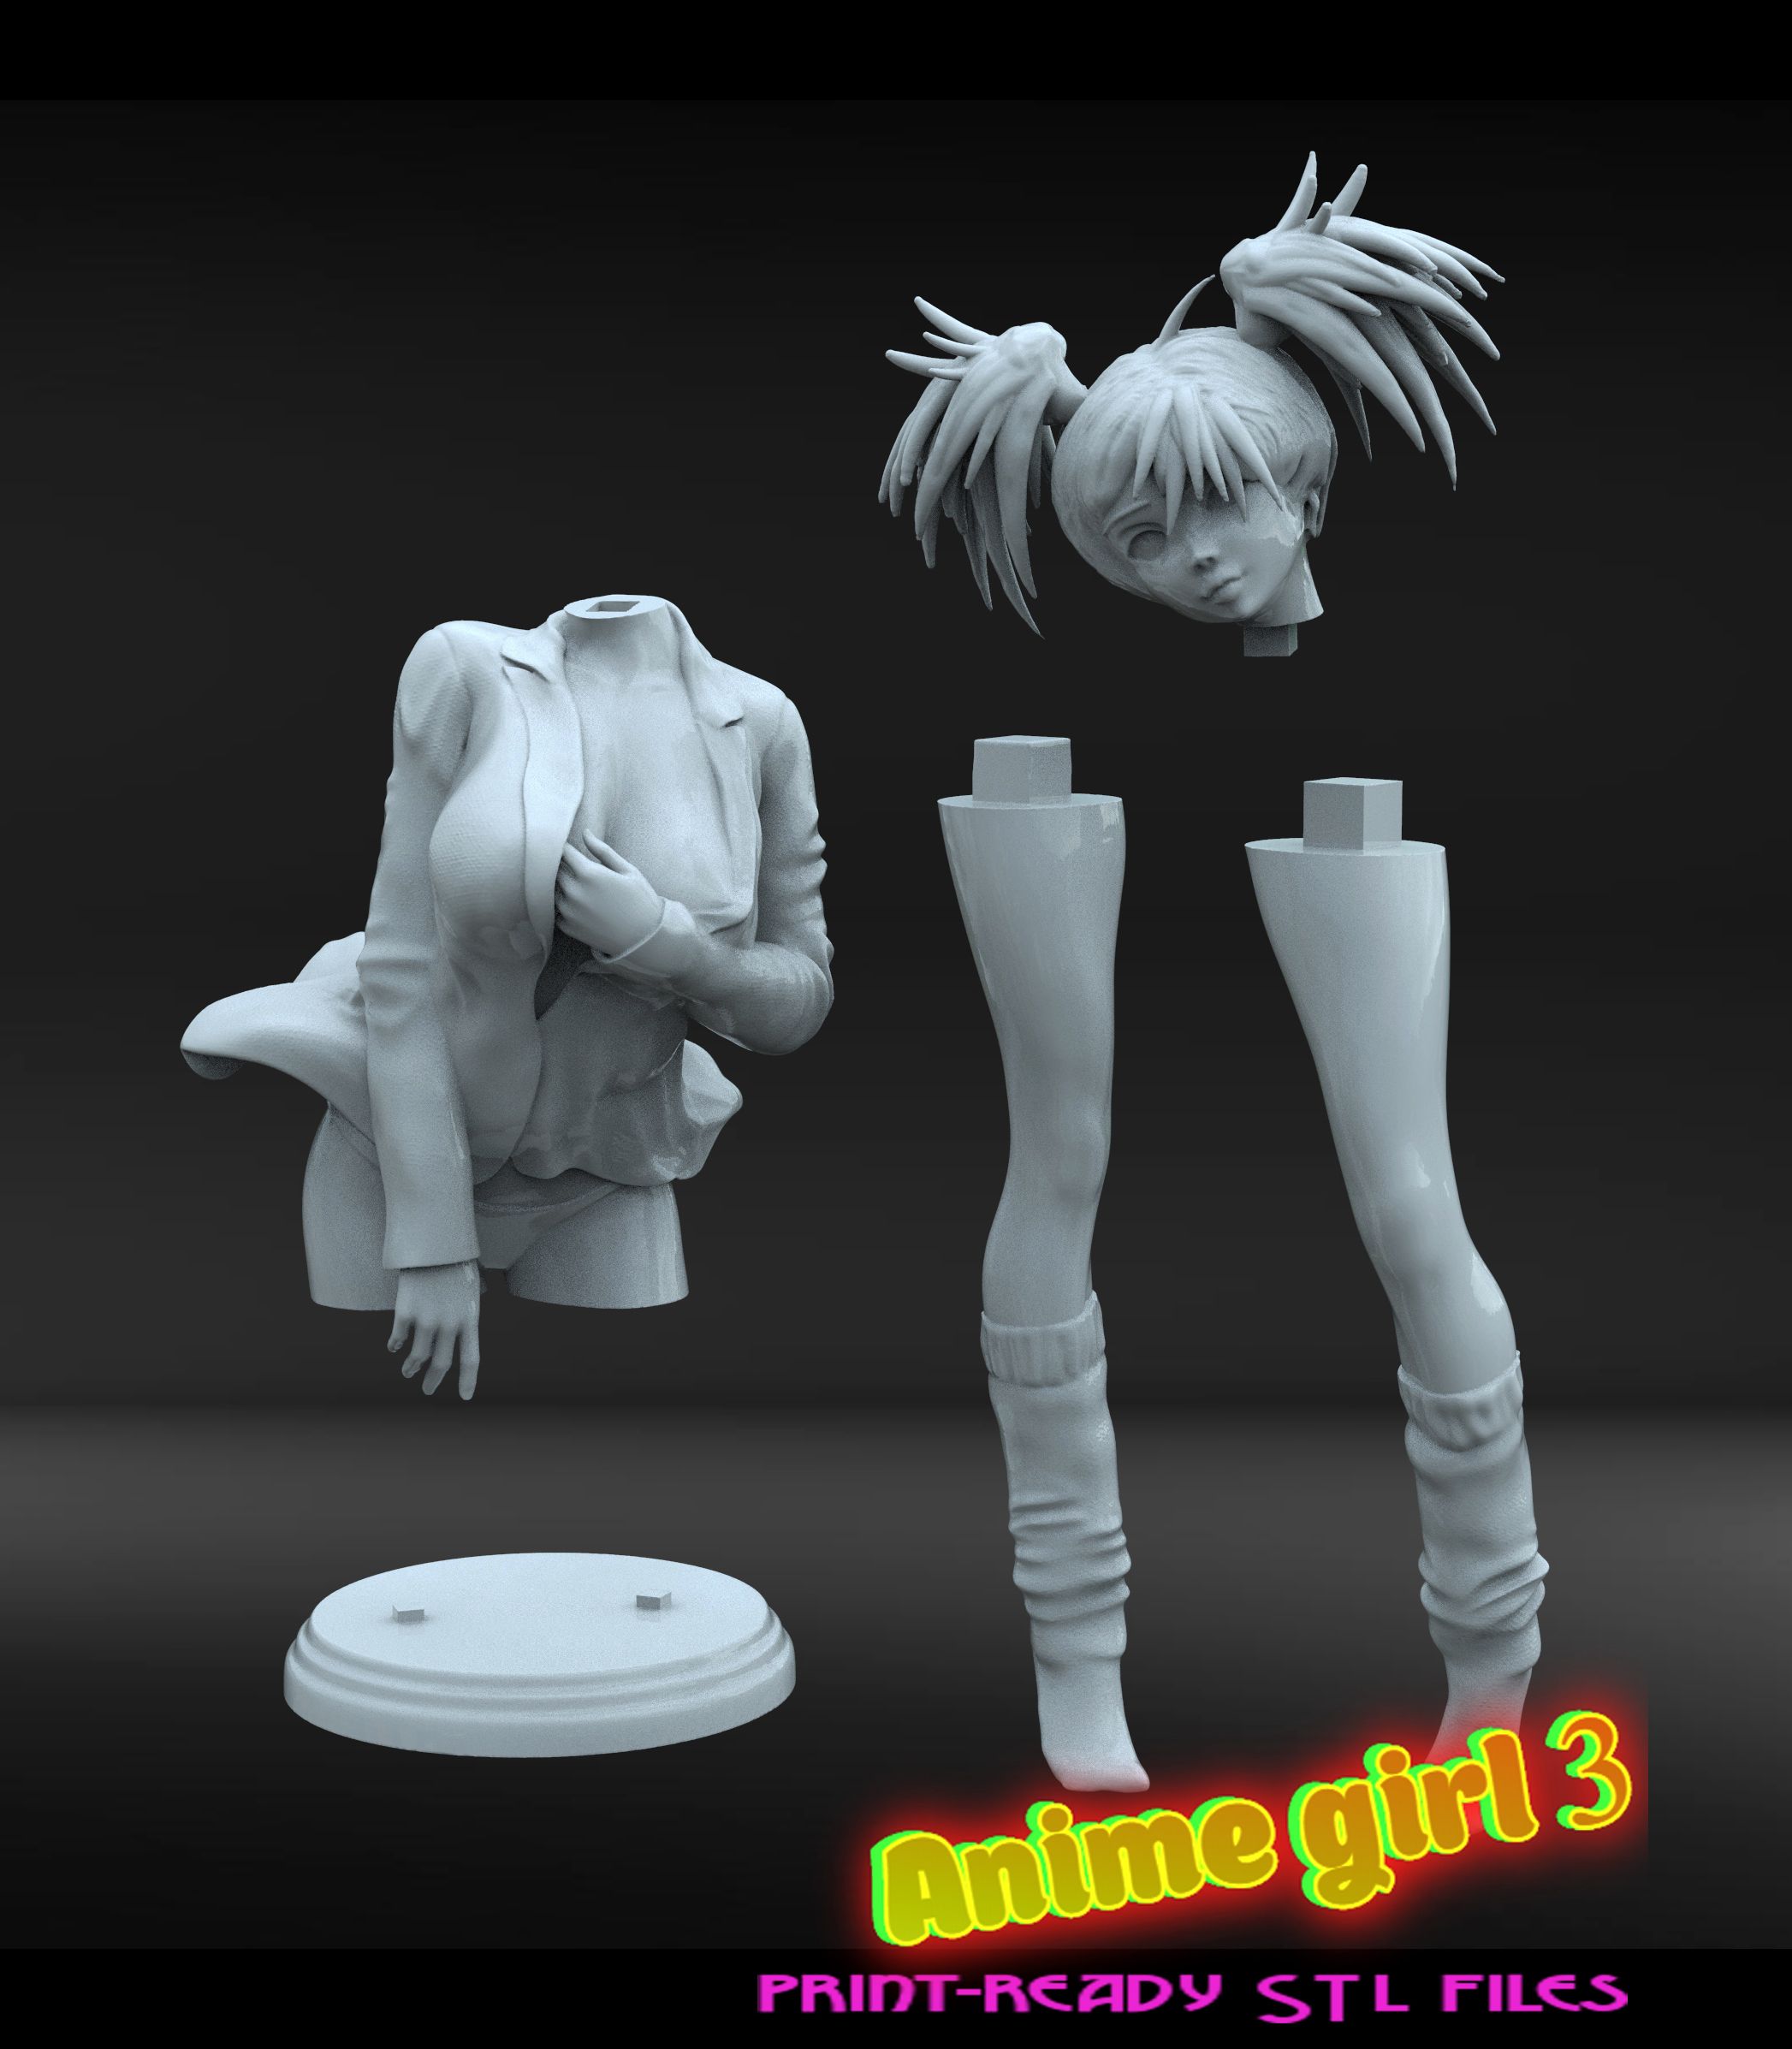 untitled.7рап11.jpg Download STL file Anime girl 3 • Model to 3D print, walades